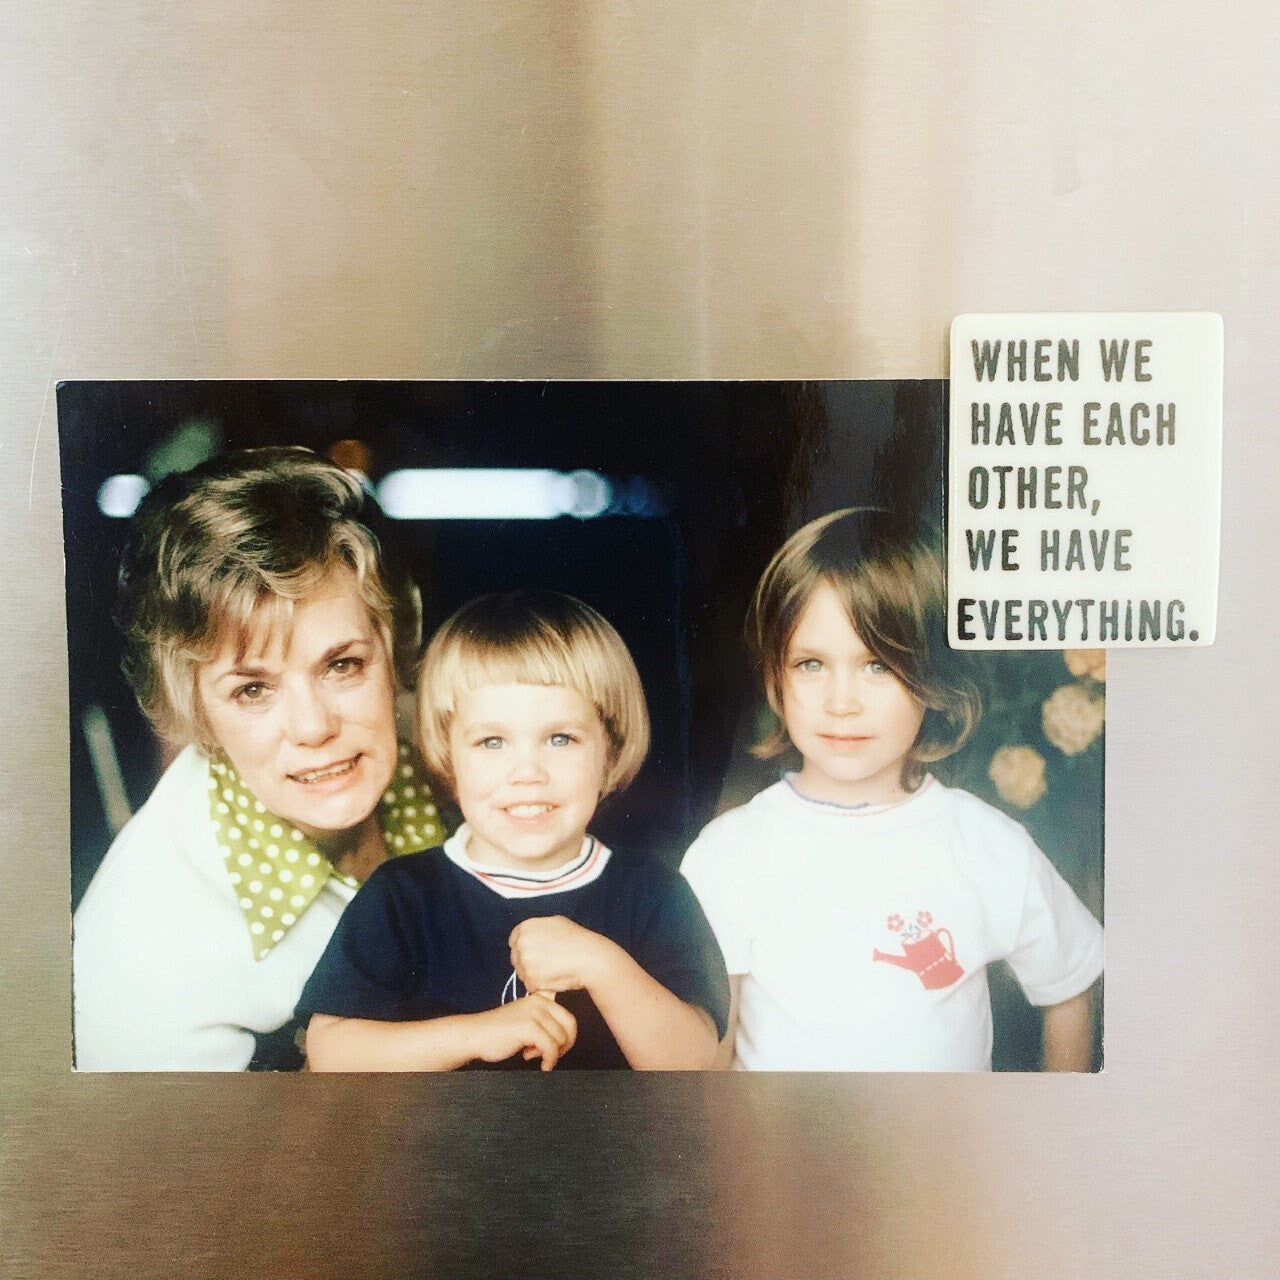 when we have each other we have everything ceramic magnet 1.5" w x 1.88" h